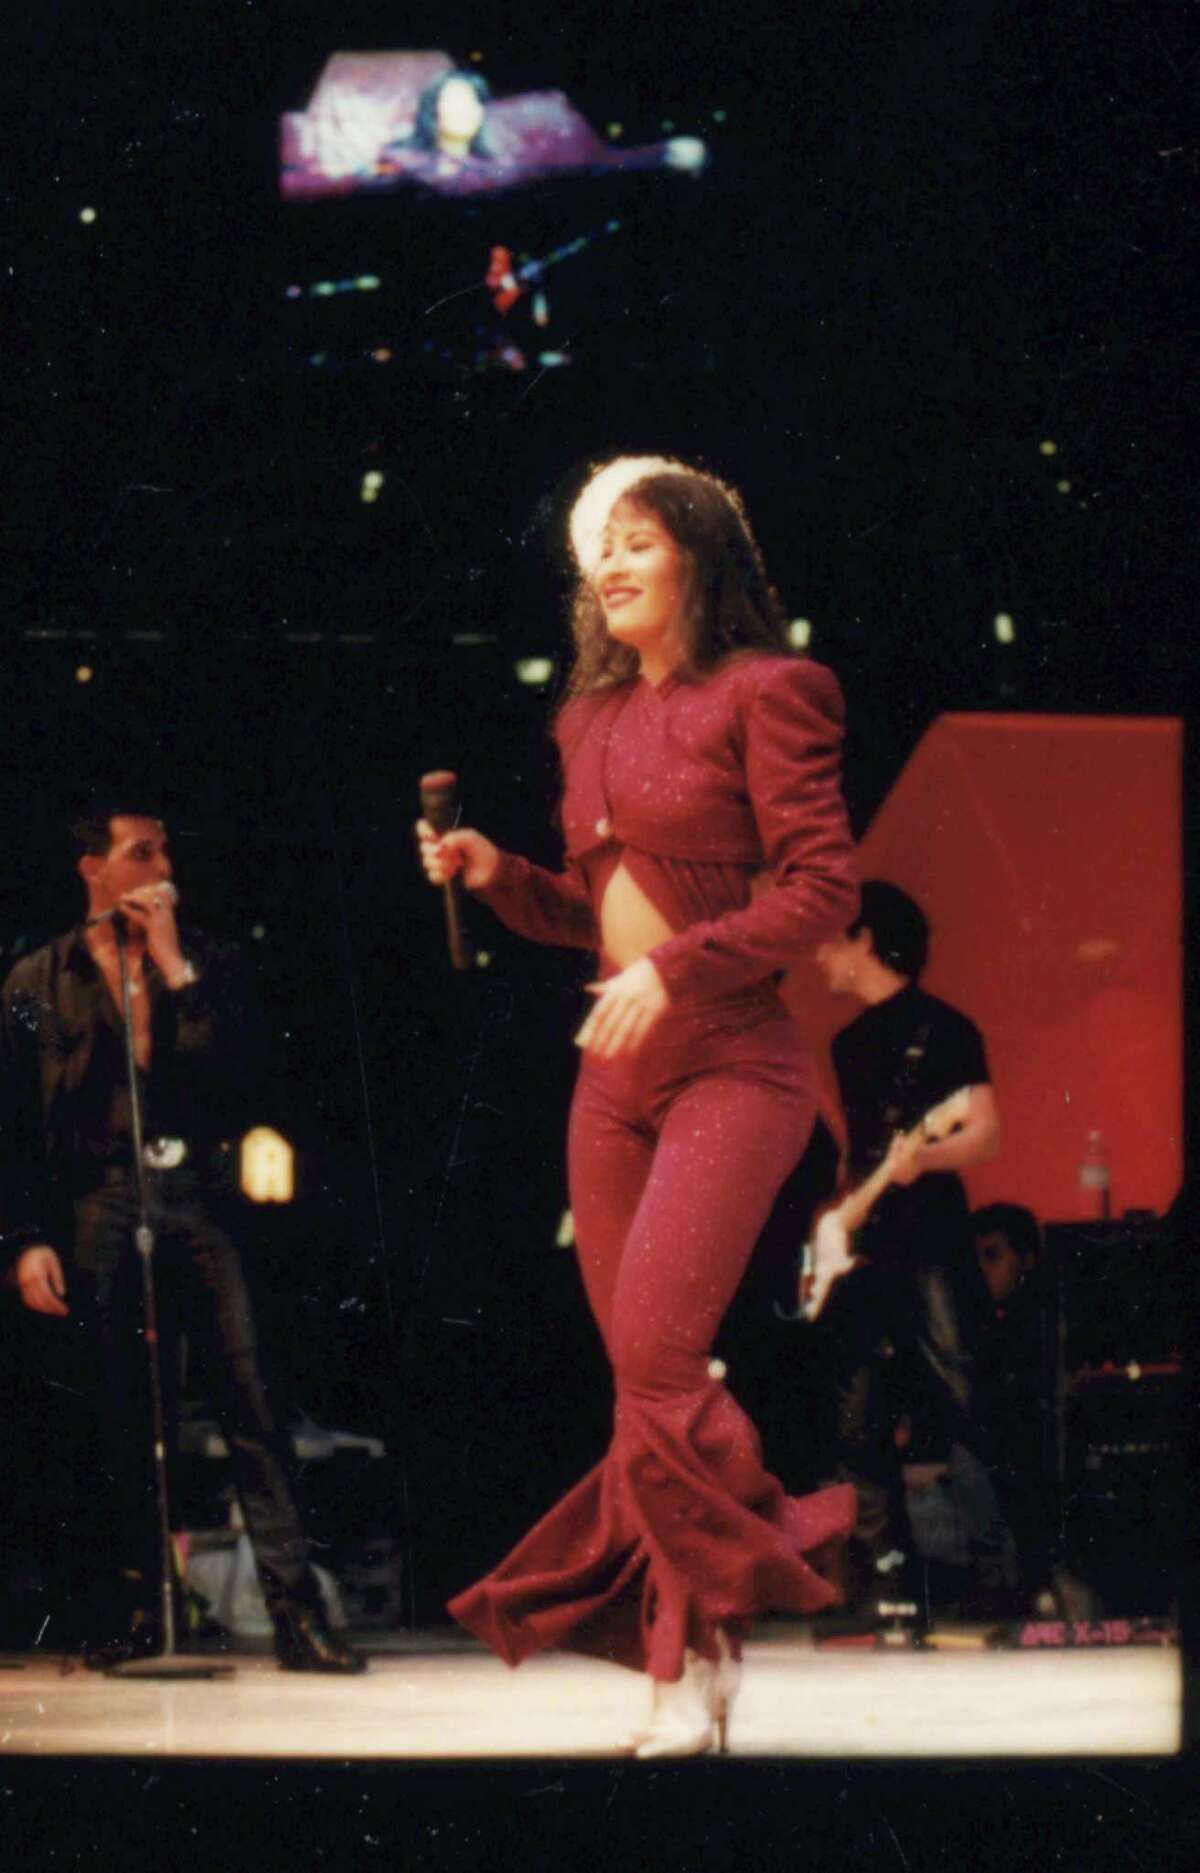 02/26/1995 - Tejano singer Selena performs at the Astrodome during the Houston Livestock Show and Rodeo. Selena Quintanilla Perez.